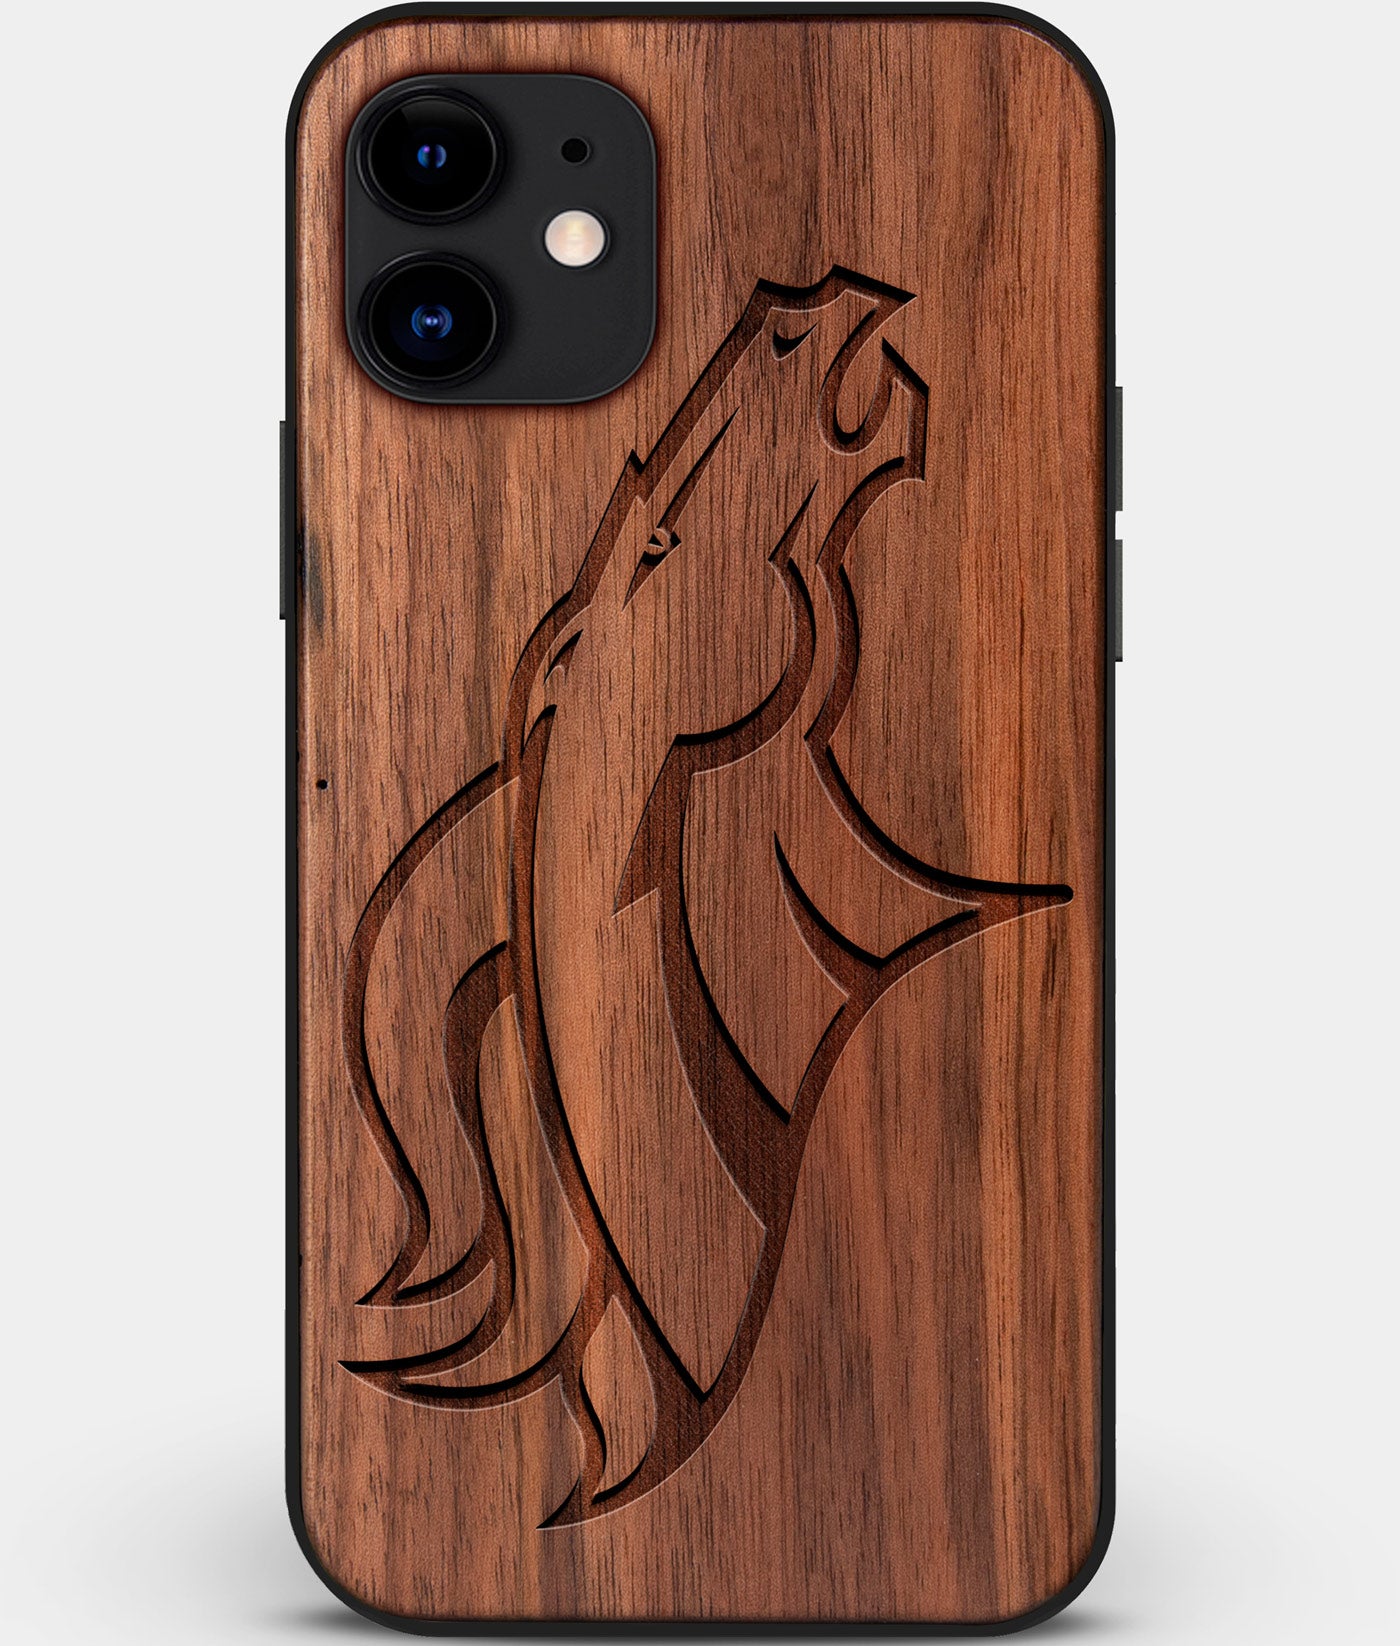 Custom Carved Wood Denver Broncos iPhone 12 Mini Case | Personalized Walnut Wood Denver Broncos Cover, Birthday Gift, Gifts For Him, Monogrammed Gift For Fan | by Engraved In Nature